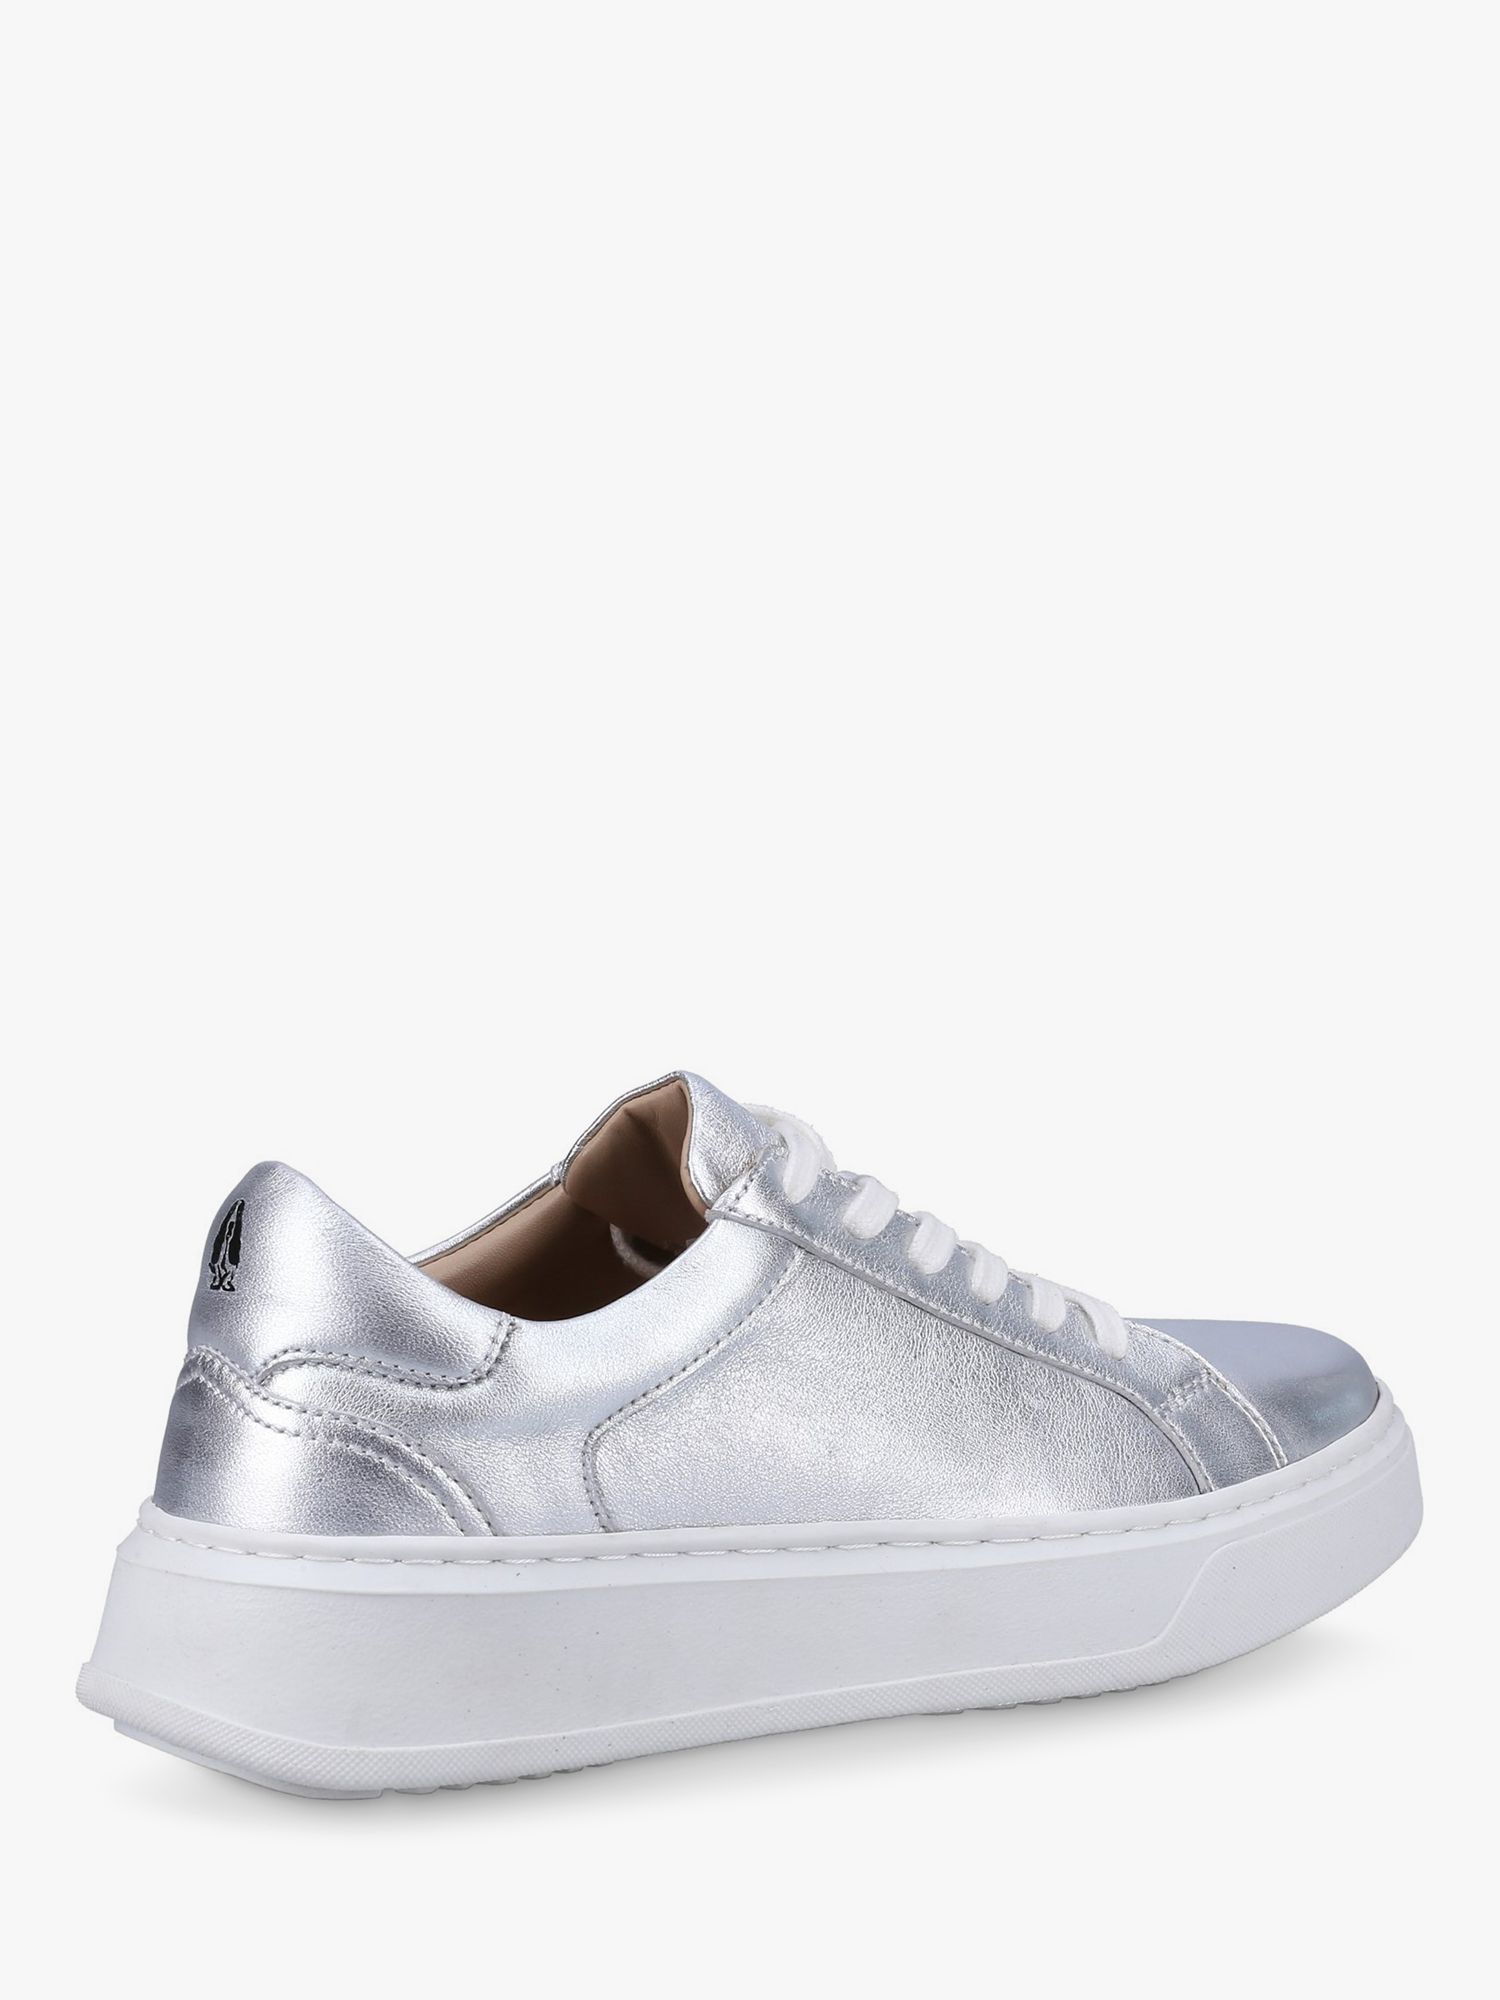 Buy Hush Puppies Camille Lace-Up Leather Trainers Online at johnlewis.com